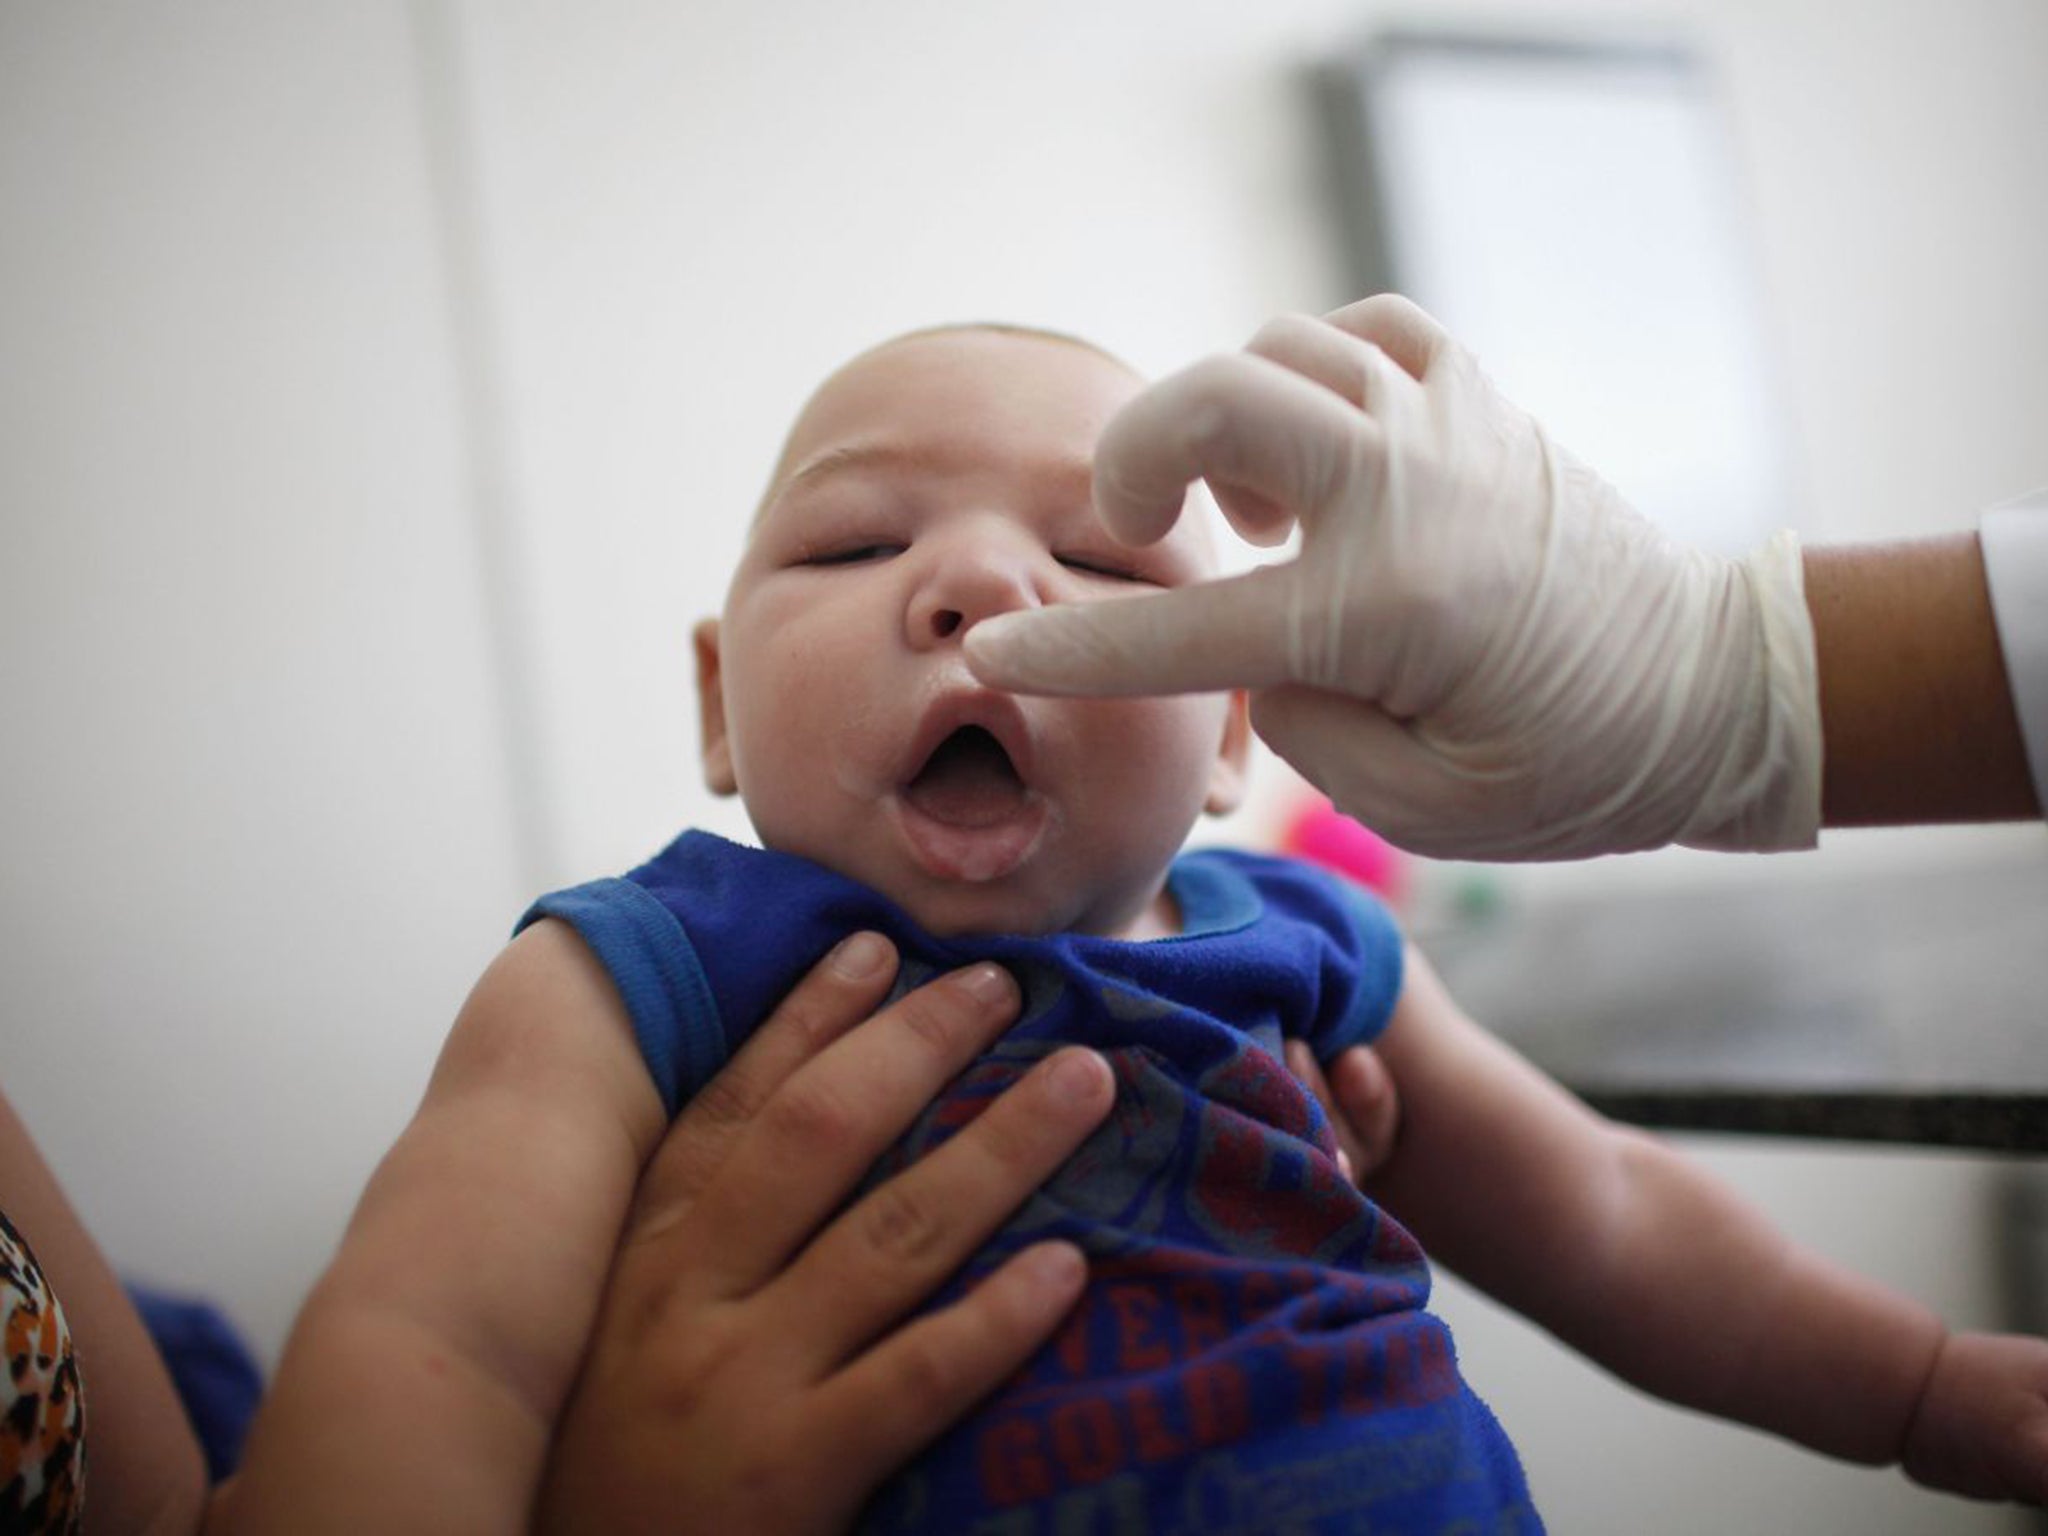 Across Brazil hundreds of infants have been born with microcephaly. The World Health Organization has now declared the Zika virus a "public health emergency of international concern"